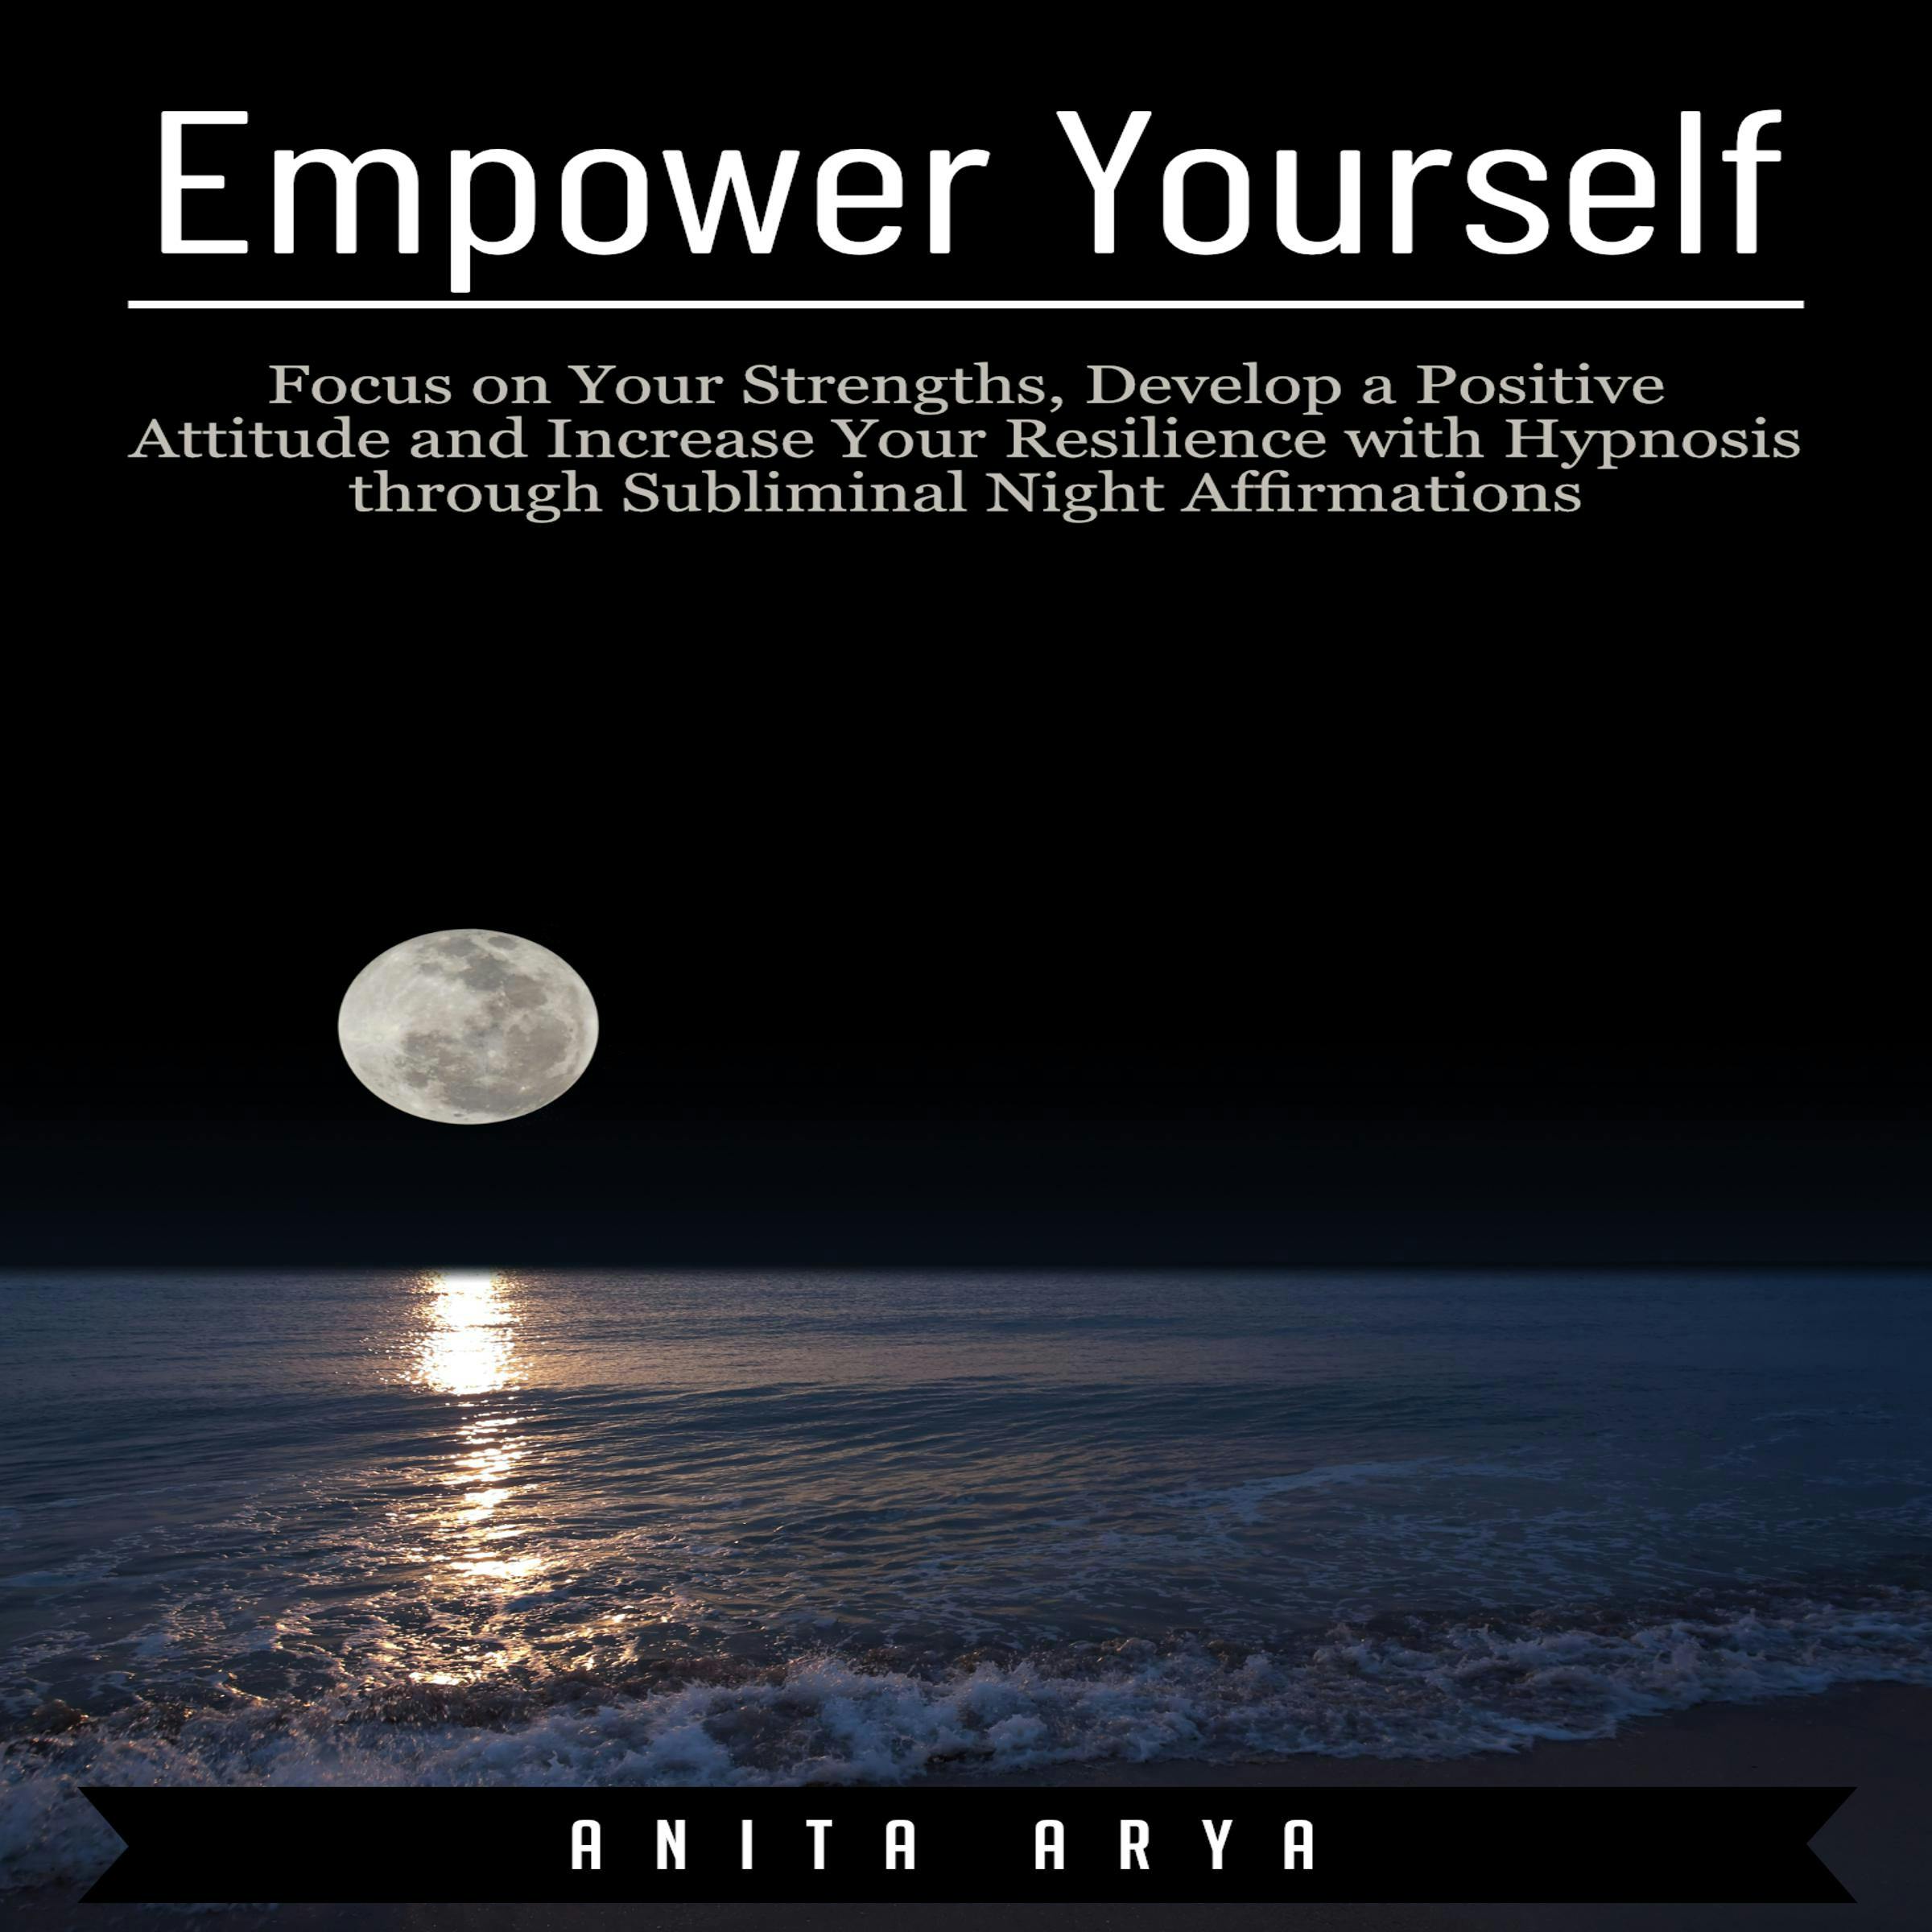 Empower Yourself: Focus on Your Strengths, Develop a Positive Attitude and Increase Your Resilience with Hypnosis through Subliminal Night Affirmations - Anita Arya